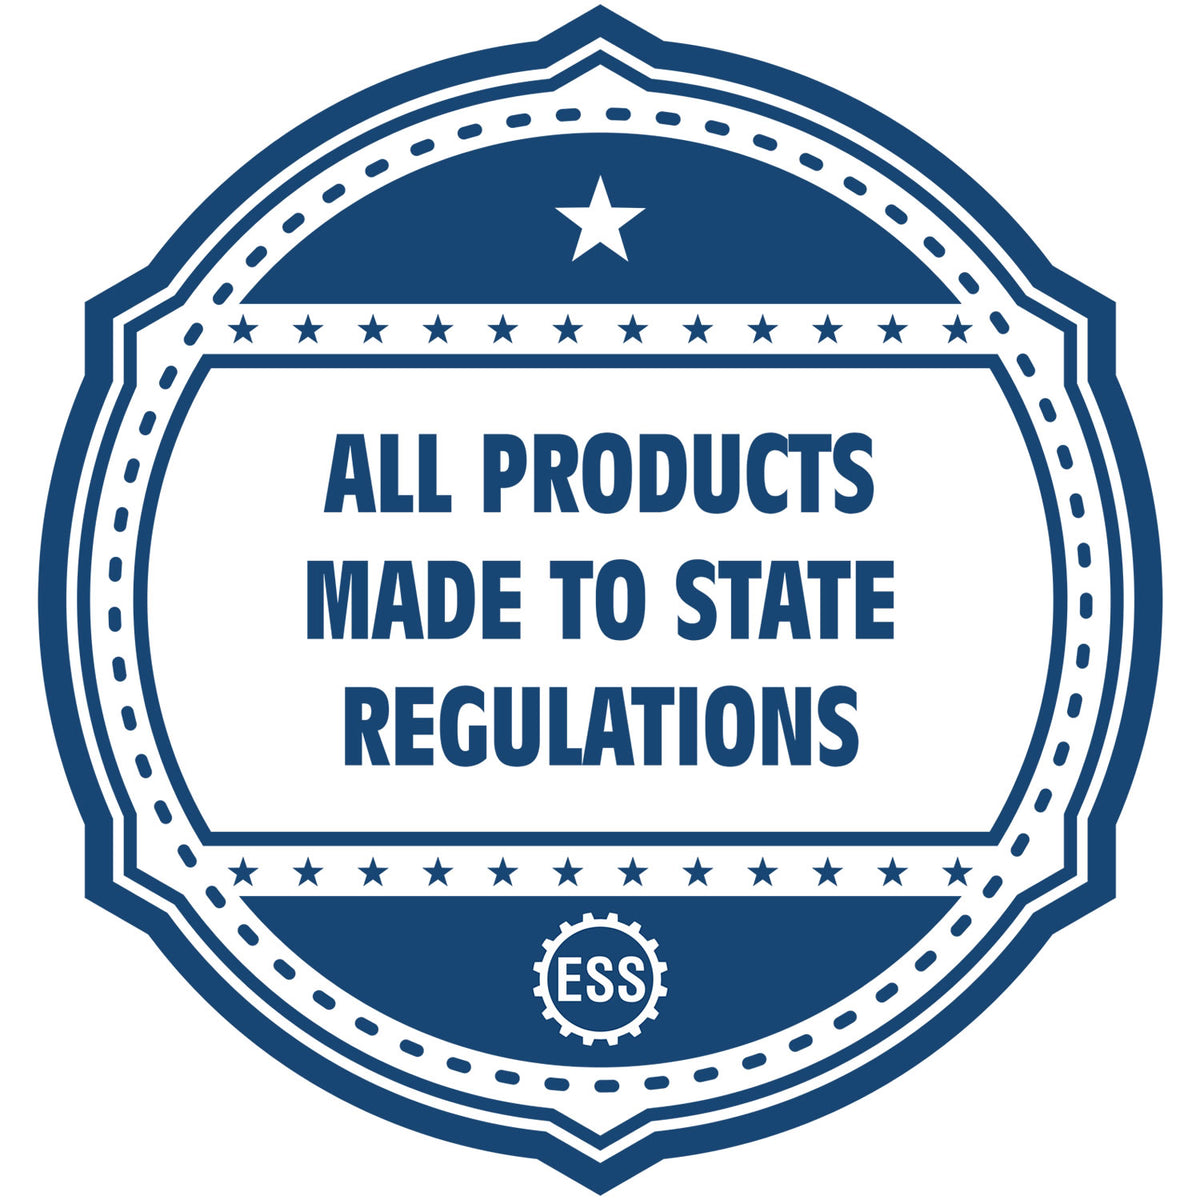 An icon or badge element for the Heavy Duty Cast Iron Missouri Engineer Seal Embosser showing that this product is made in compliance with state regulations.